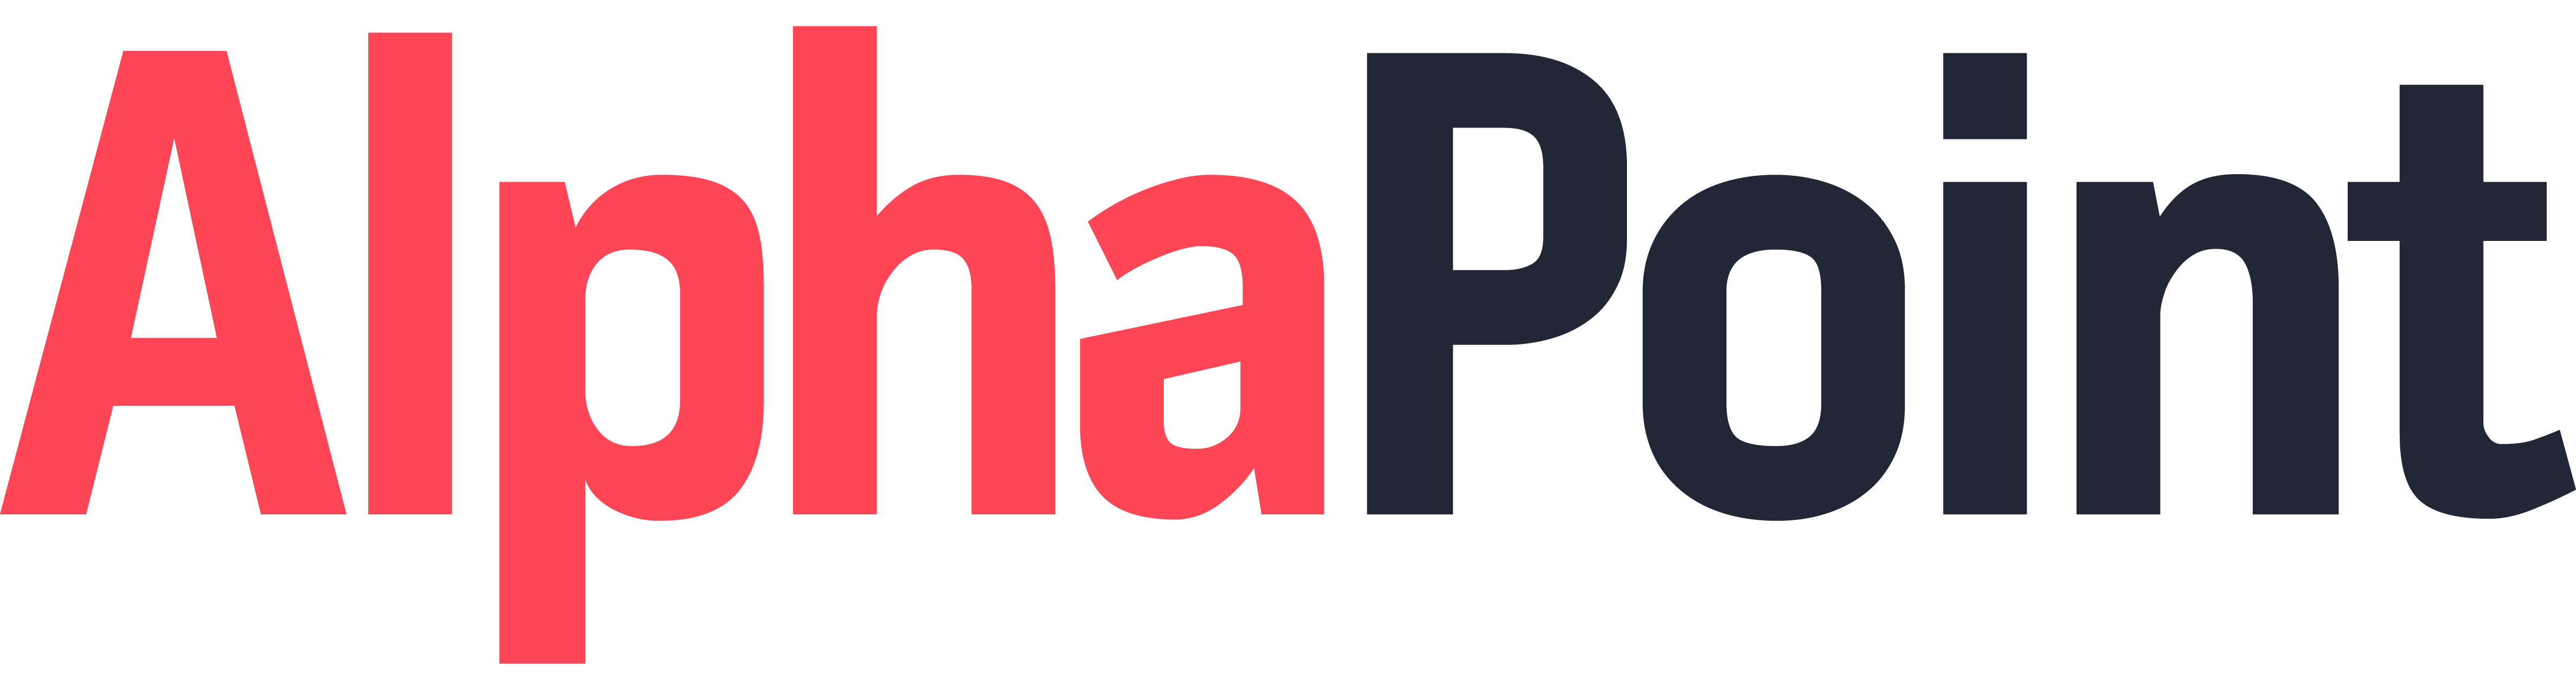 AlphaPoint logo.png